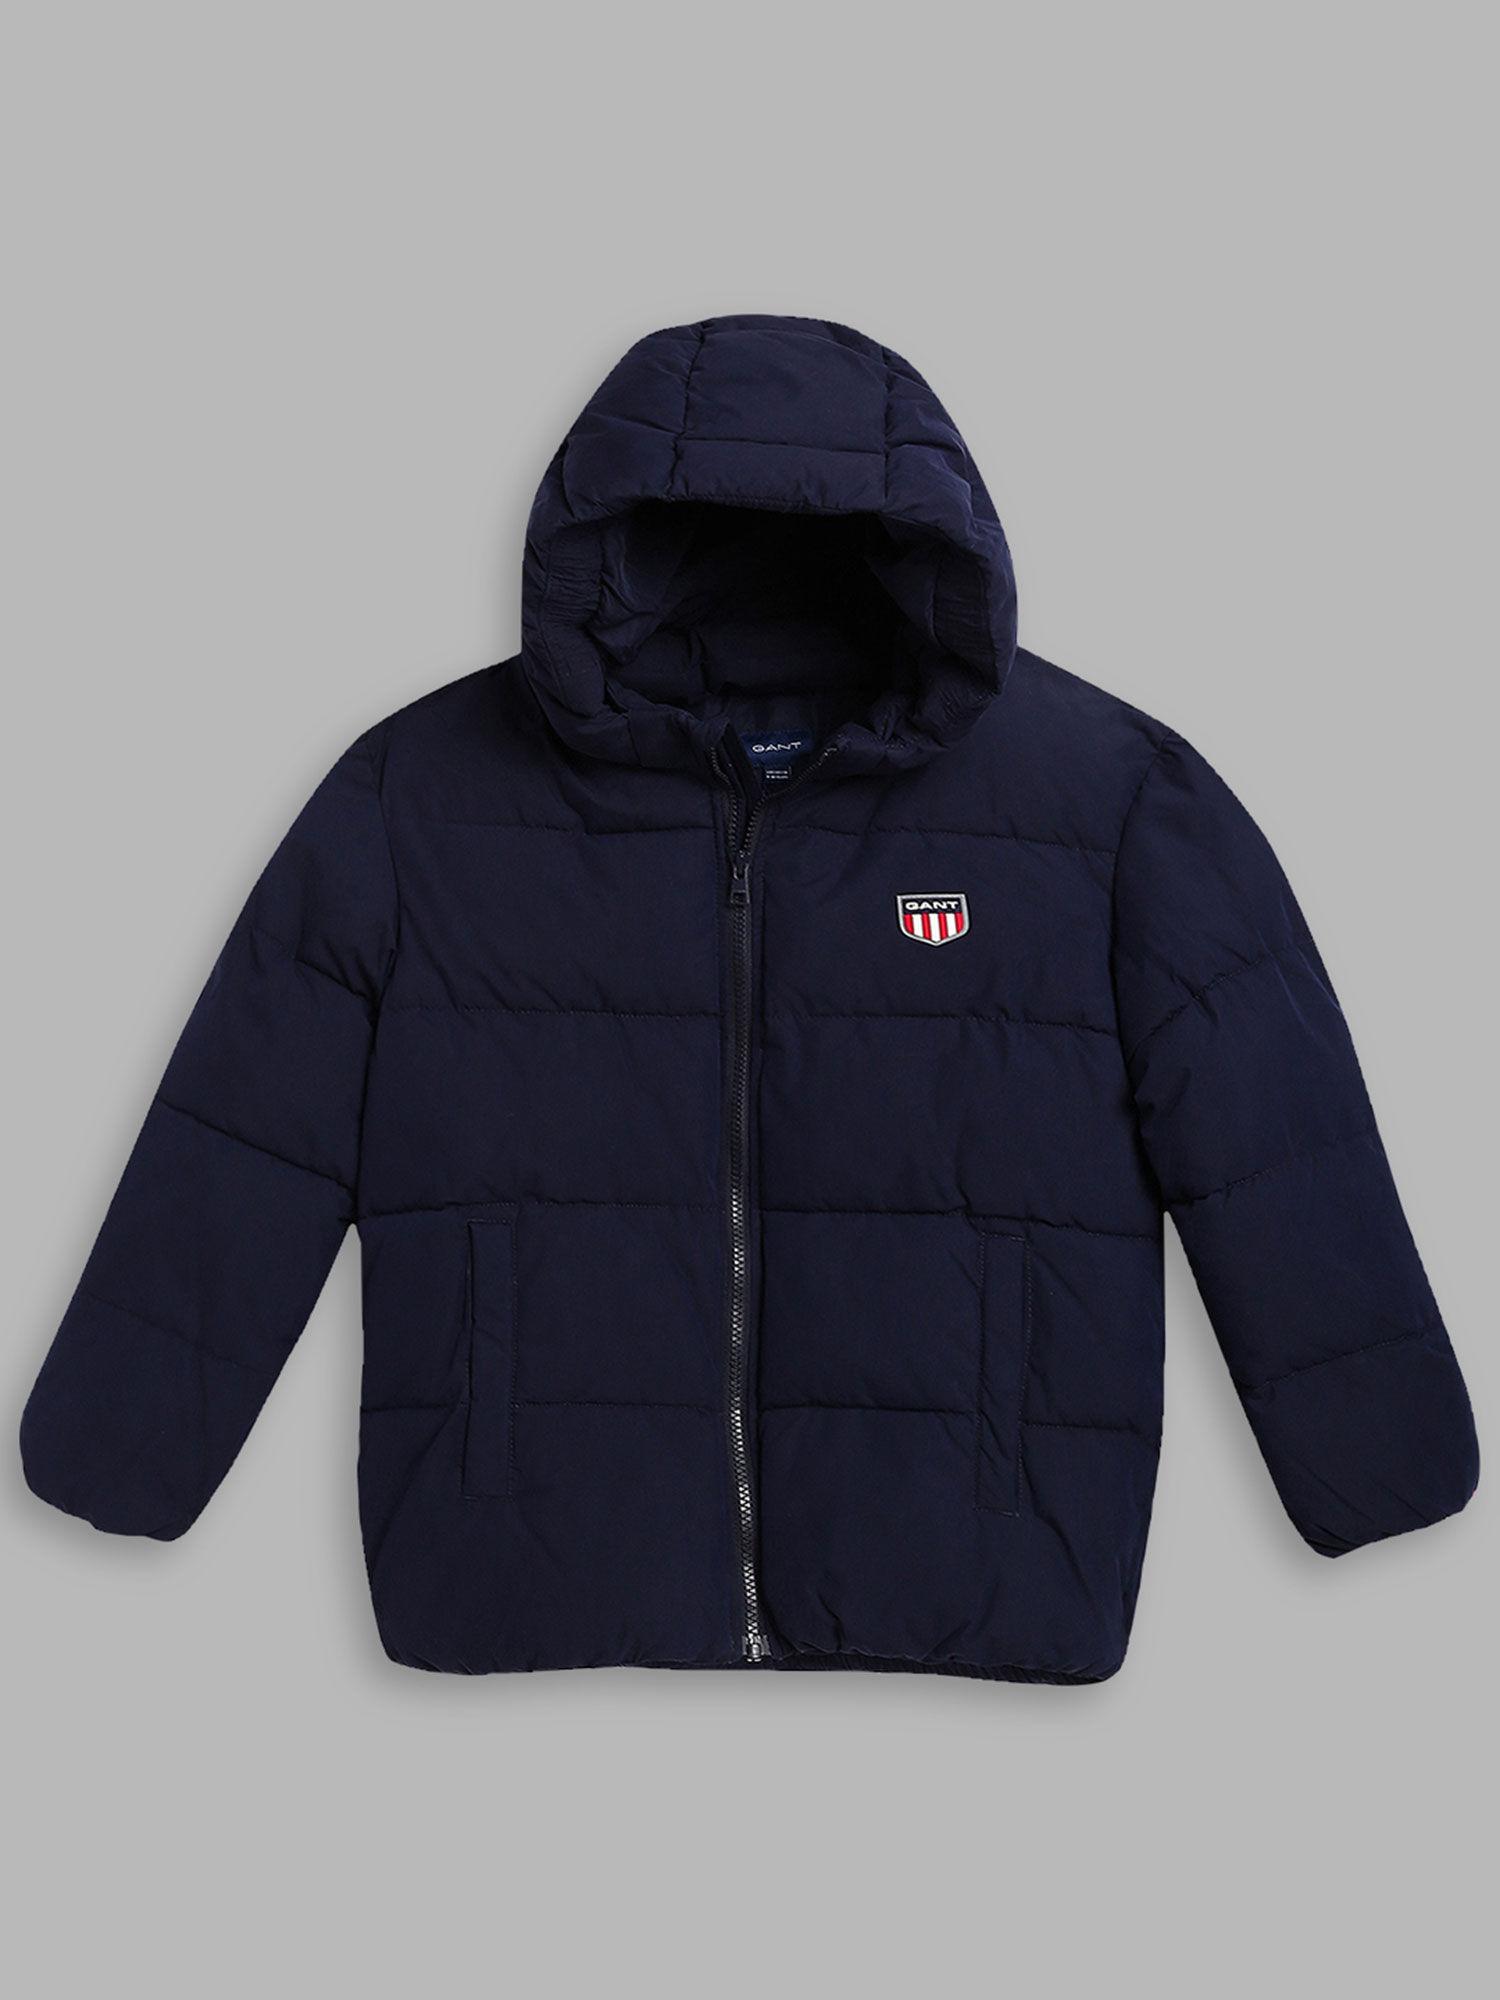 boys navy blue jacket with detachable hoodie